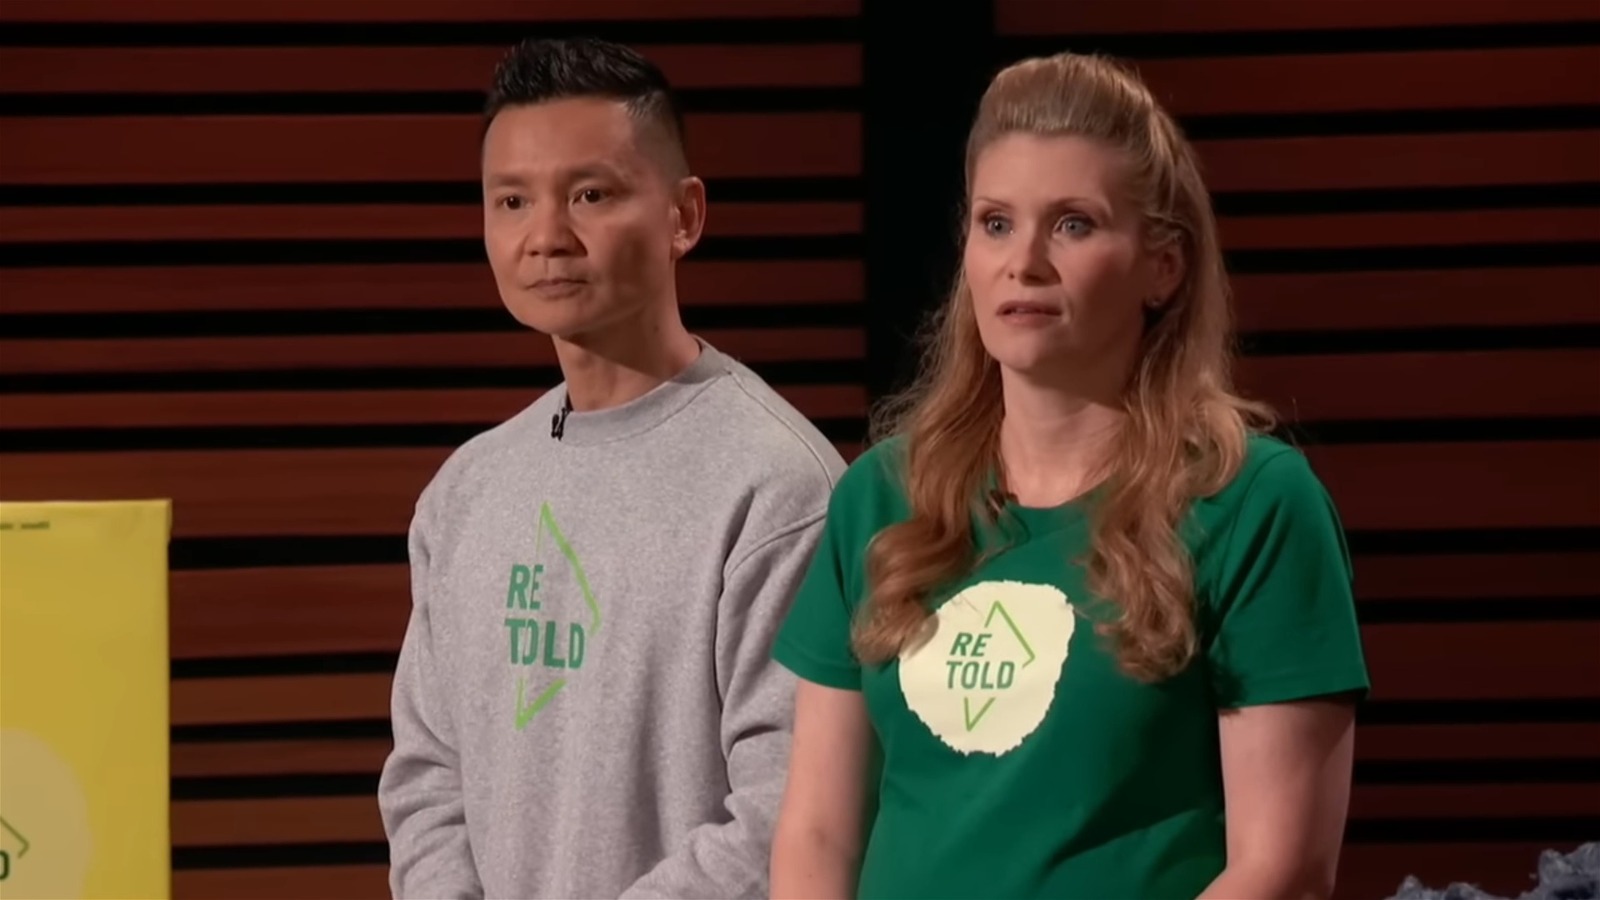 Here's What Went Down With Retold Recycling After Shark Tank